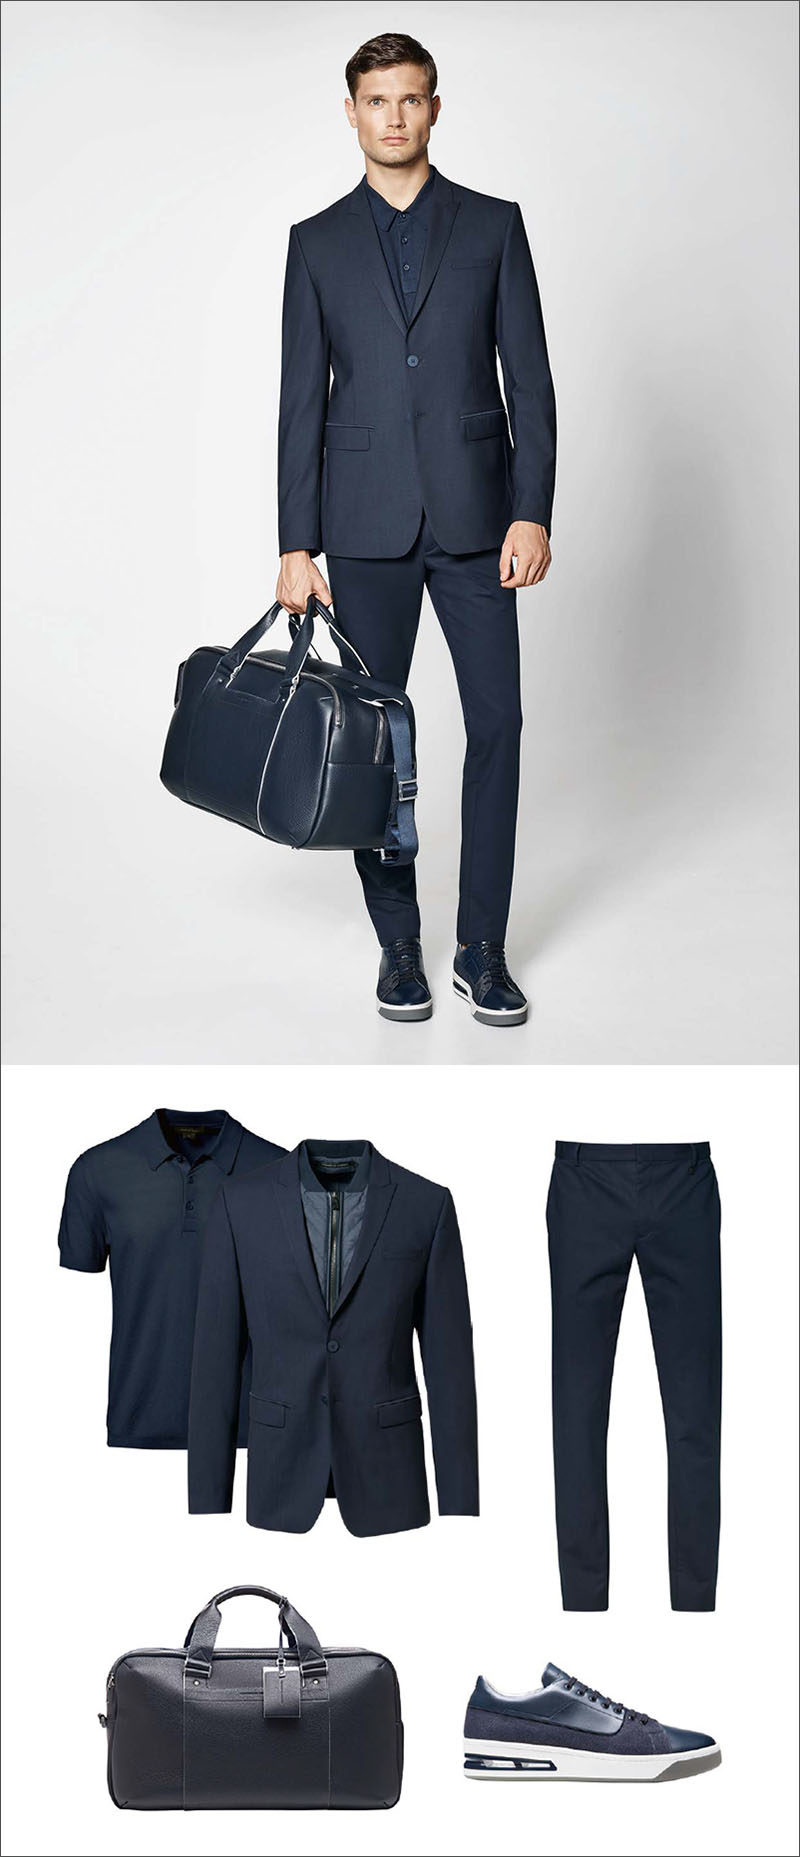 Men's Fashion Ideas - 17 Men's Outfits From Porsche Design's 2017 Spring/Summer Collection | This monochrome men's outfit pairs a slim fitting navy blazer with a navy knit polo shirt, crisp navy cotton pants, casual navy sneakers, and navy leather weekend bag.